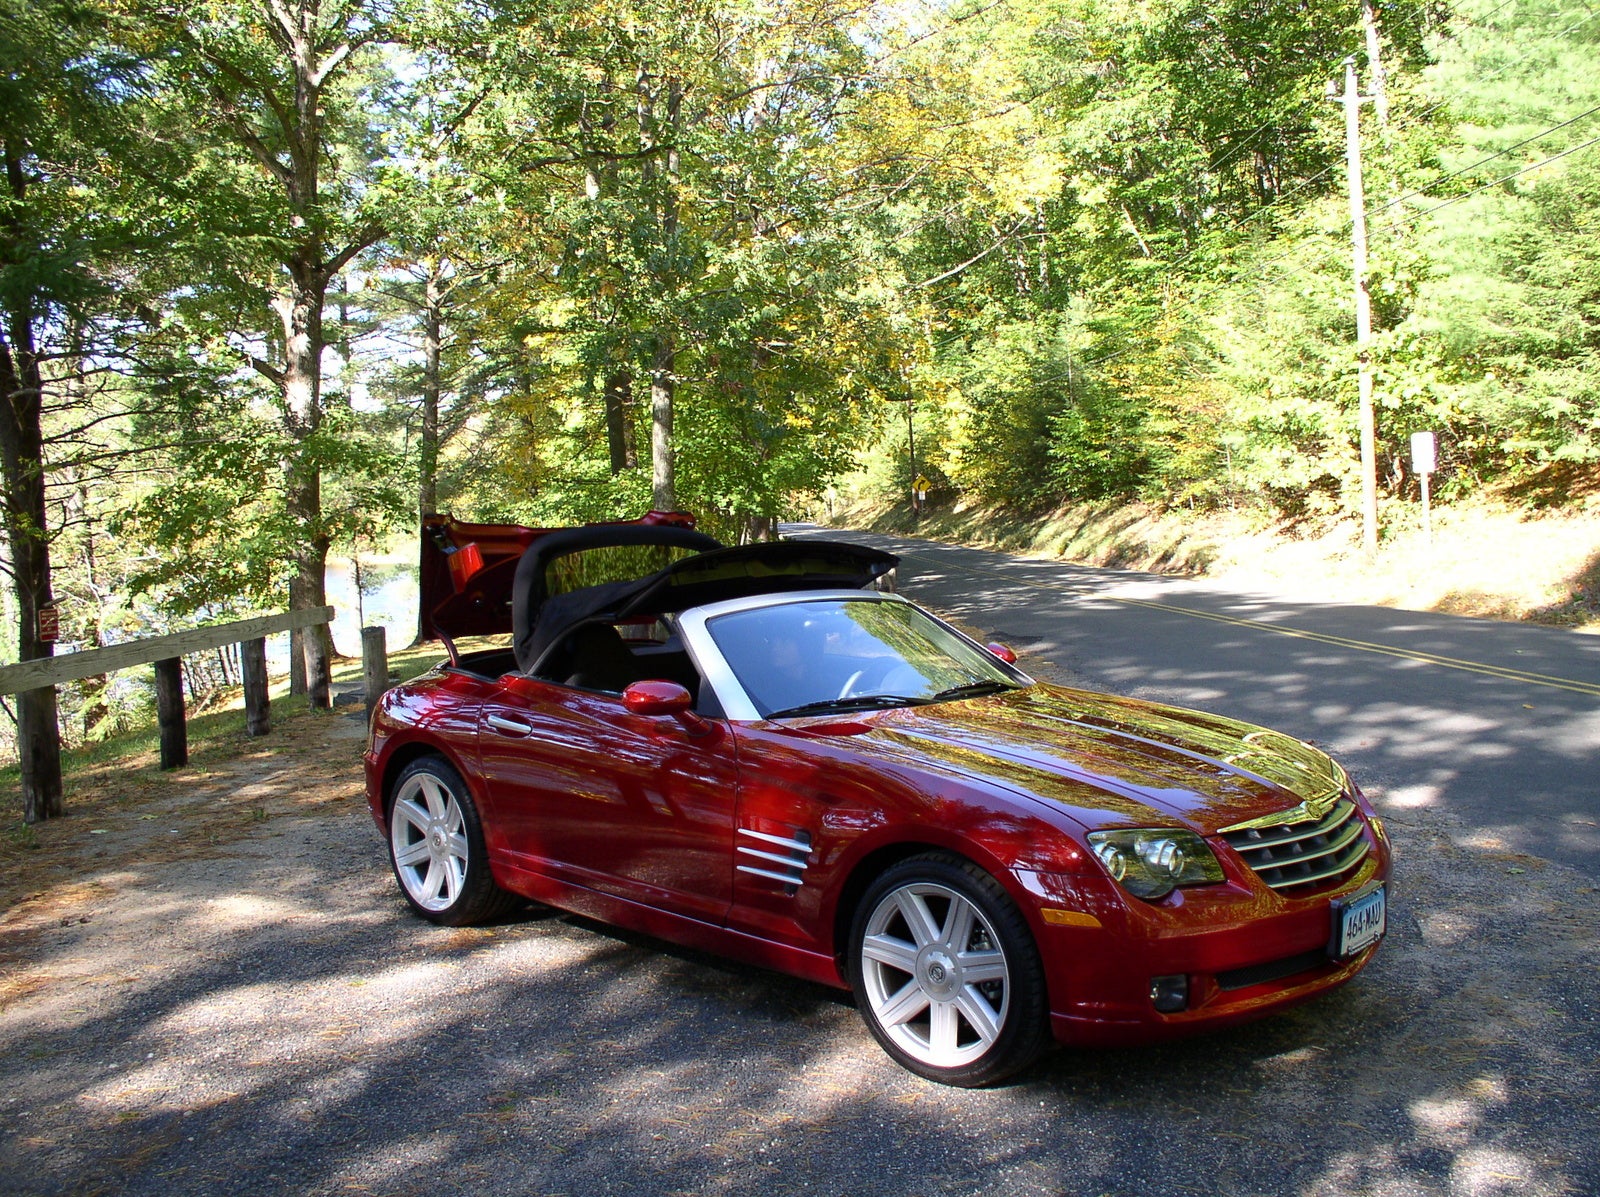 Chrysler crossfire roadster accessories #2